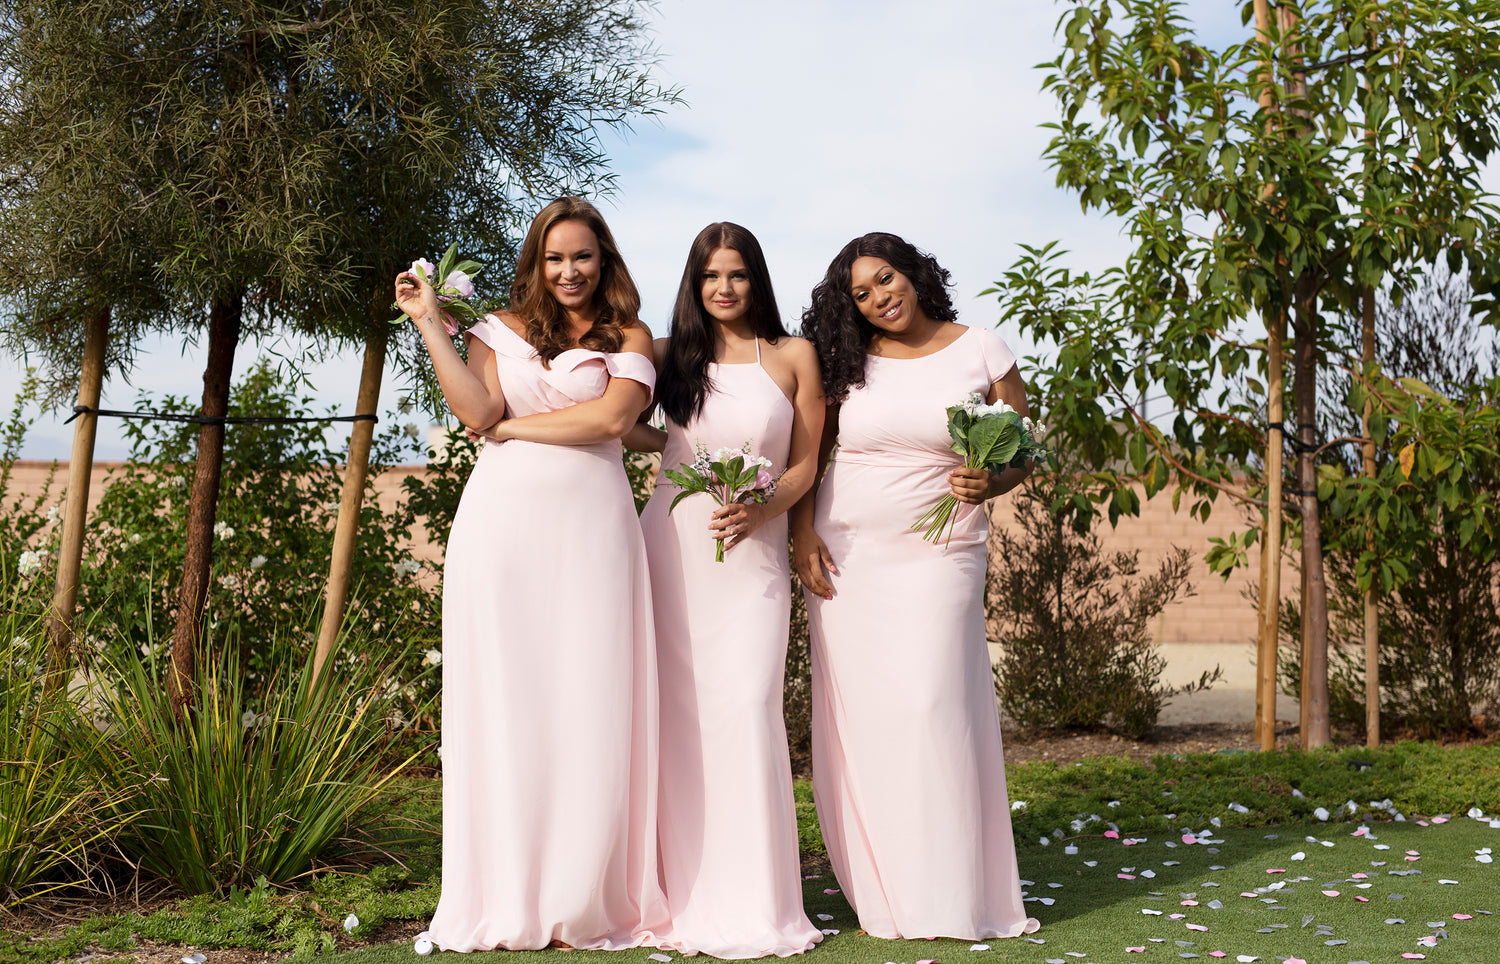 Who Are Your Bridesmaids?